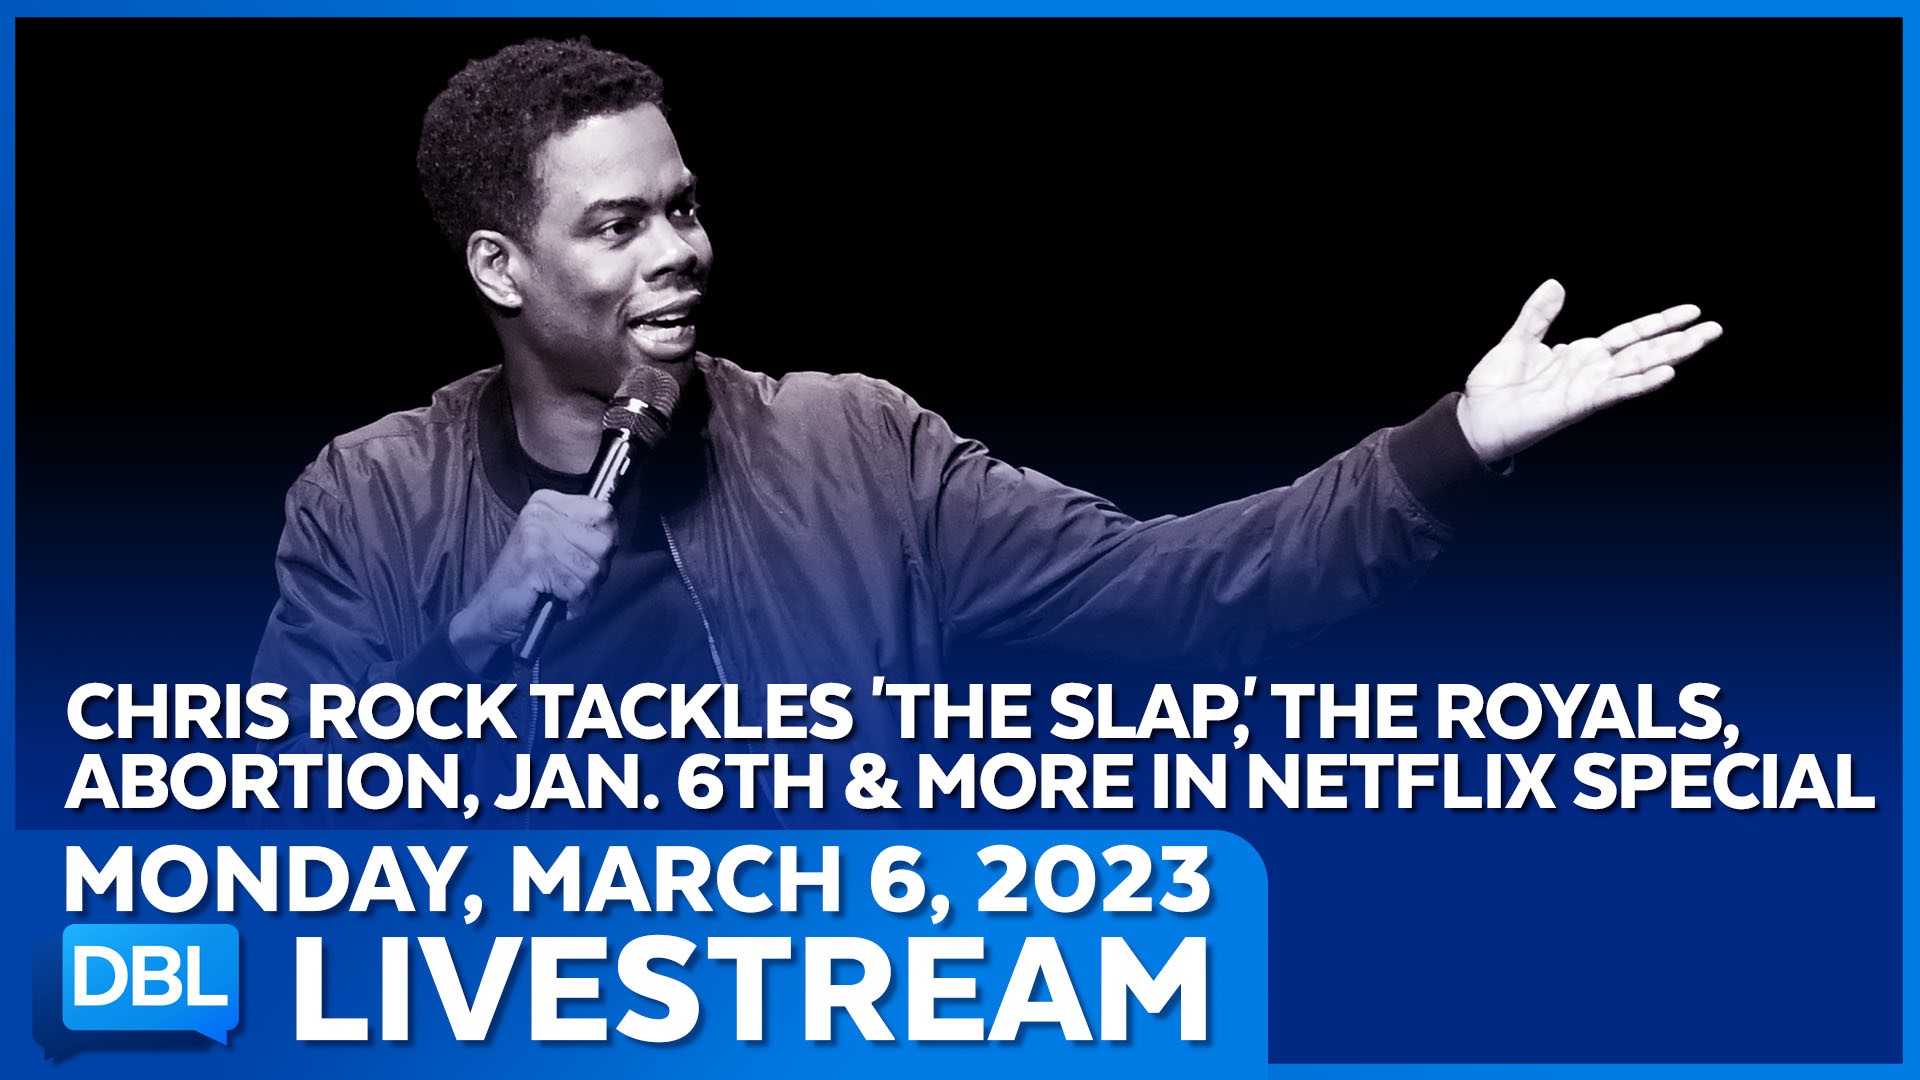 Chris Rock punches back in weekend comedy special; a scary flight for passengers as the cabin fills with smoke; 'Ghostbusters' legend Ernie Hudson joins.